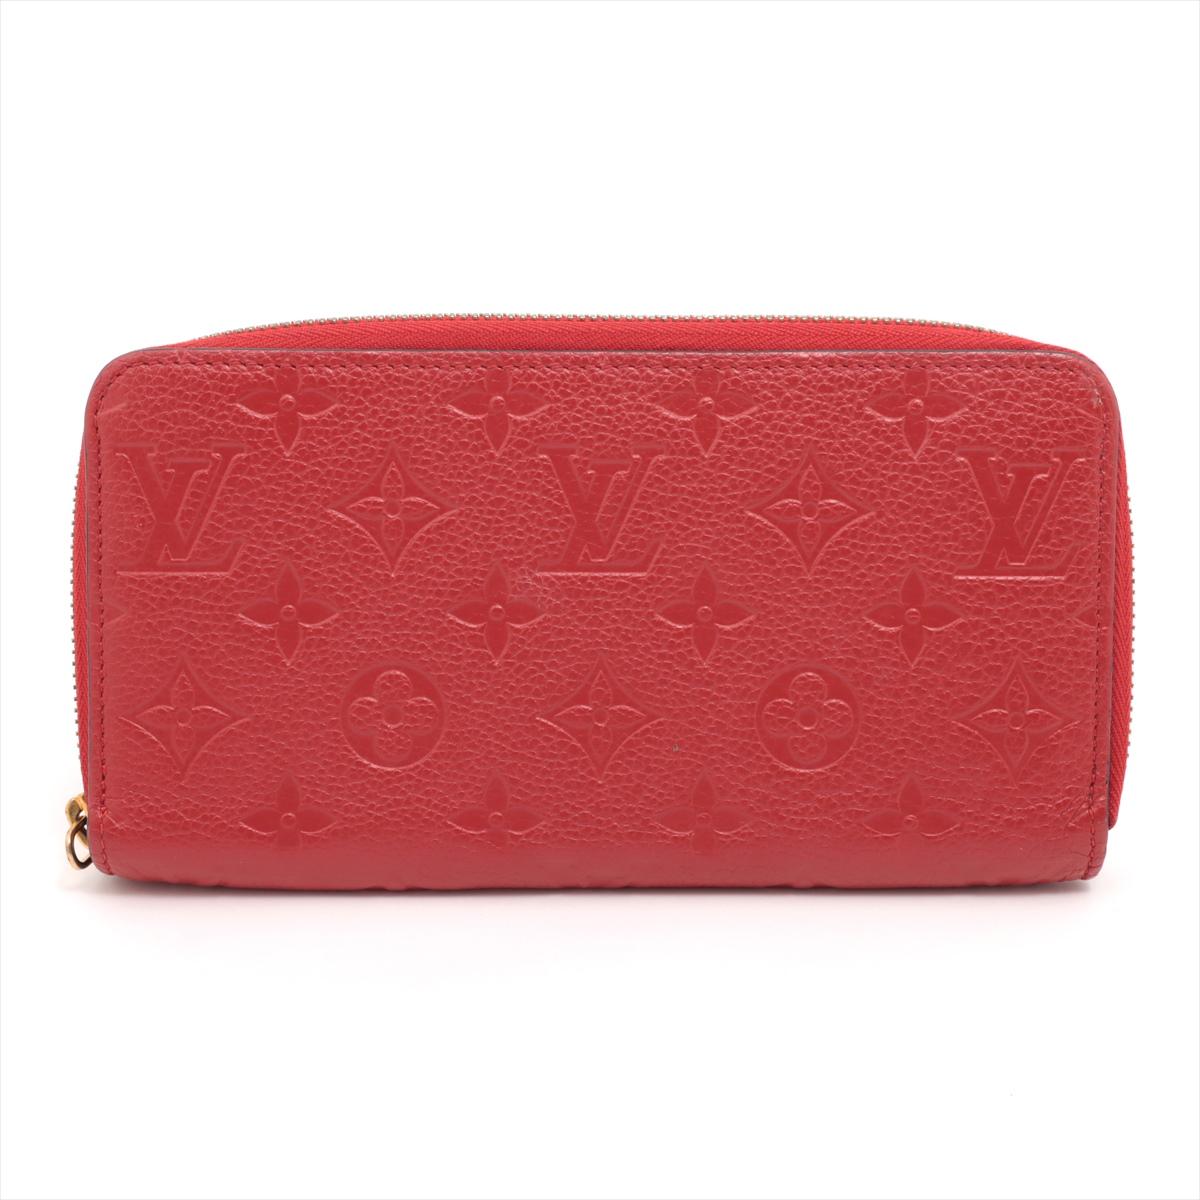 The Louis Vuitton Monogram Empreinte Zippy Wallet in bold red is the epitome of luxury and sophistication. Crafted from the finest Monogram Empreinte leather, it showcases the iconic Louis Vuitton monogram pattern embossed onto supple calf leather,